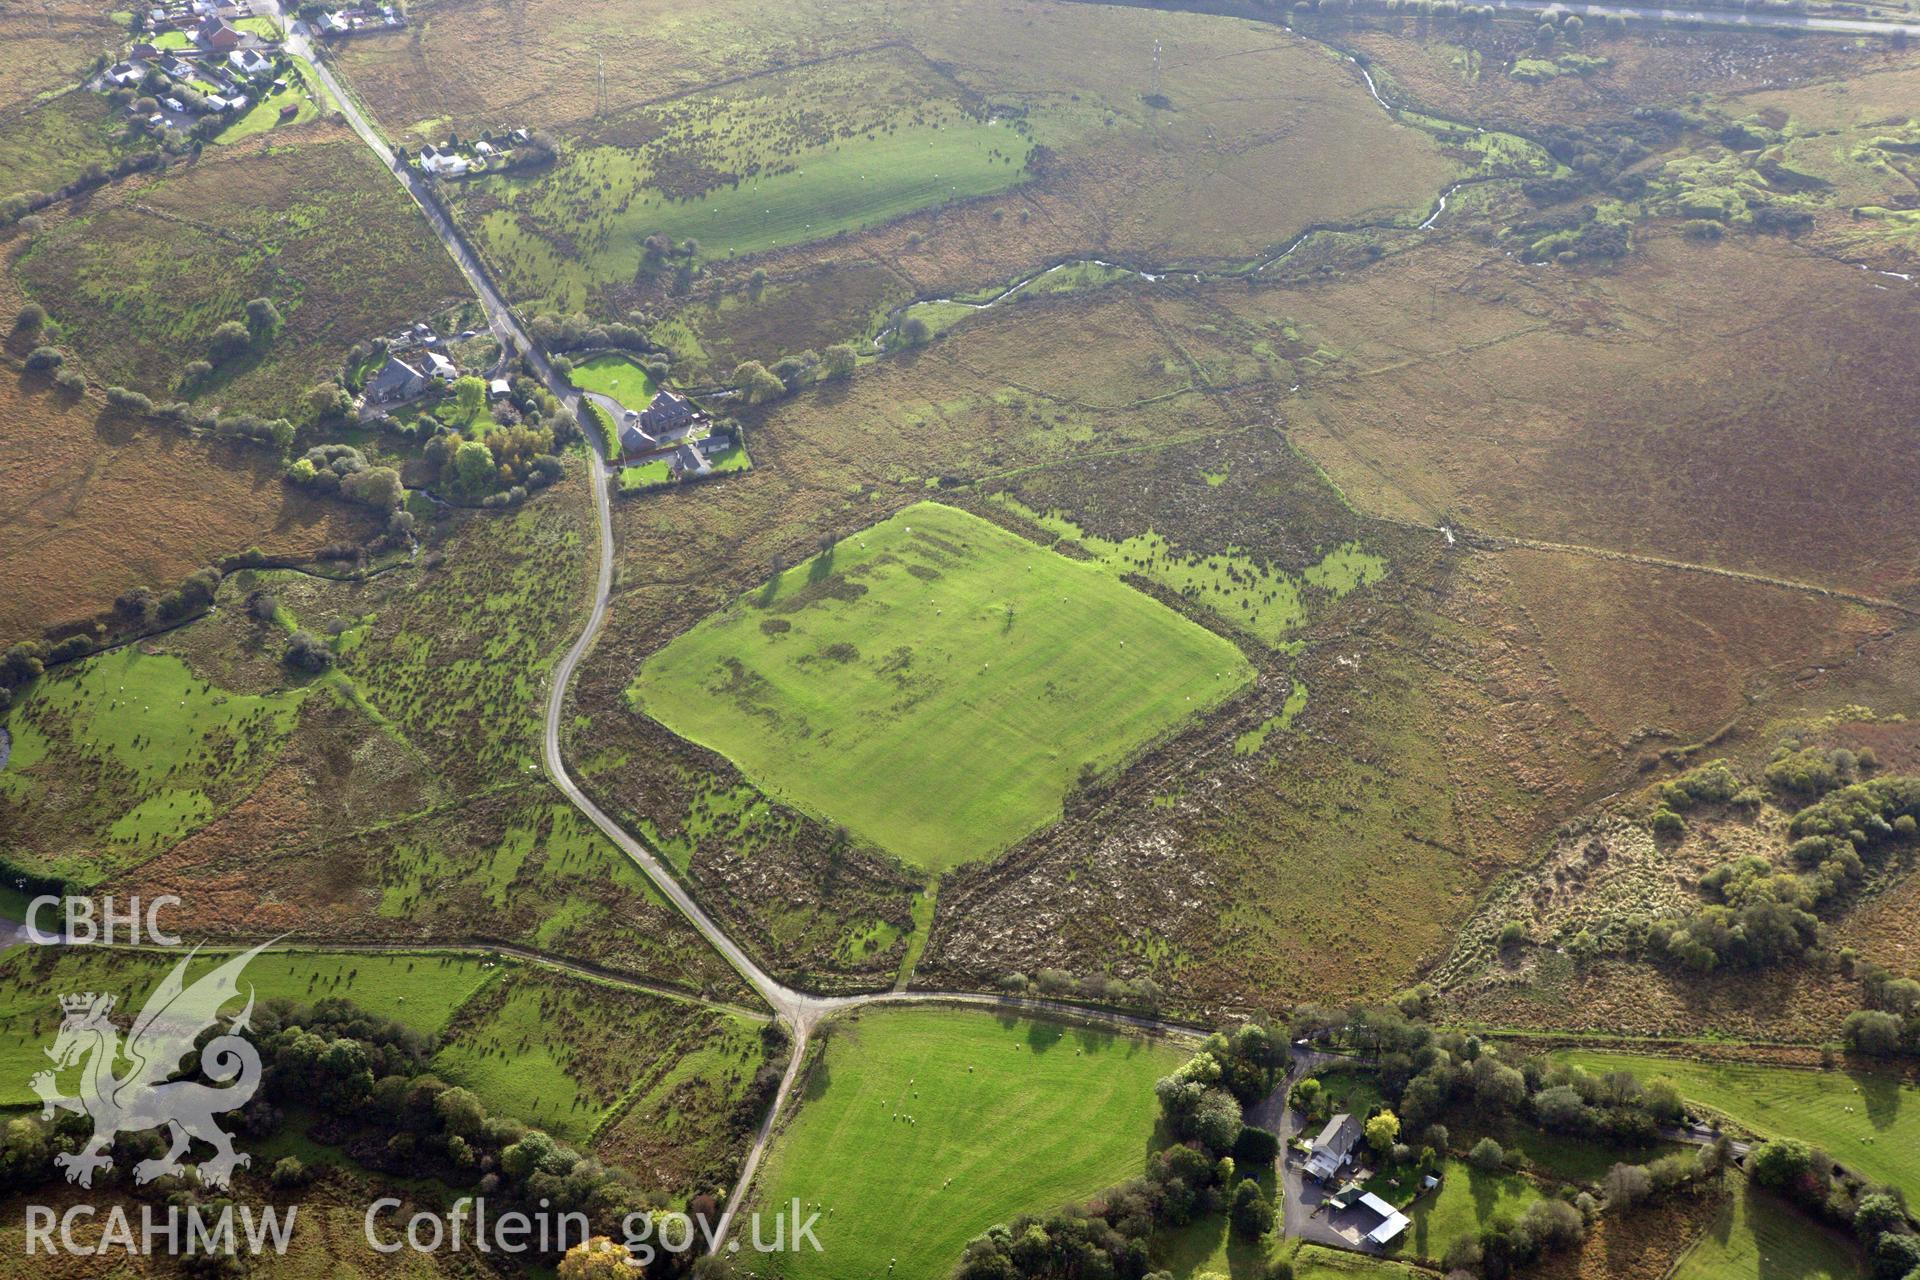 RCAHMW colour oblique aerial photograph of Coelbren Roman Fort. Taken on 14 October 2009 by Toby Driver